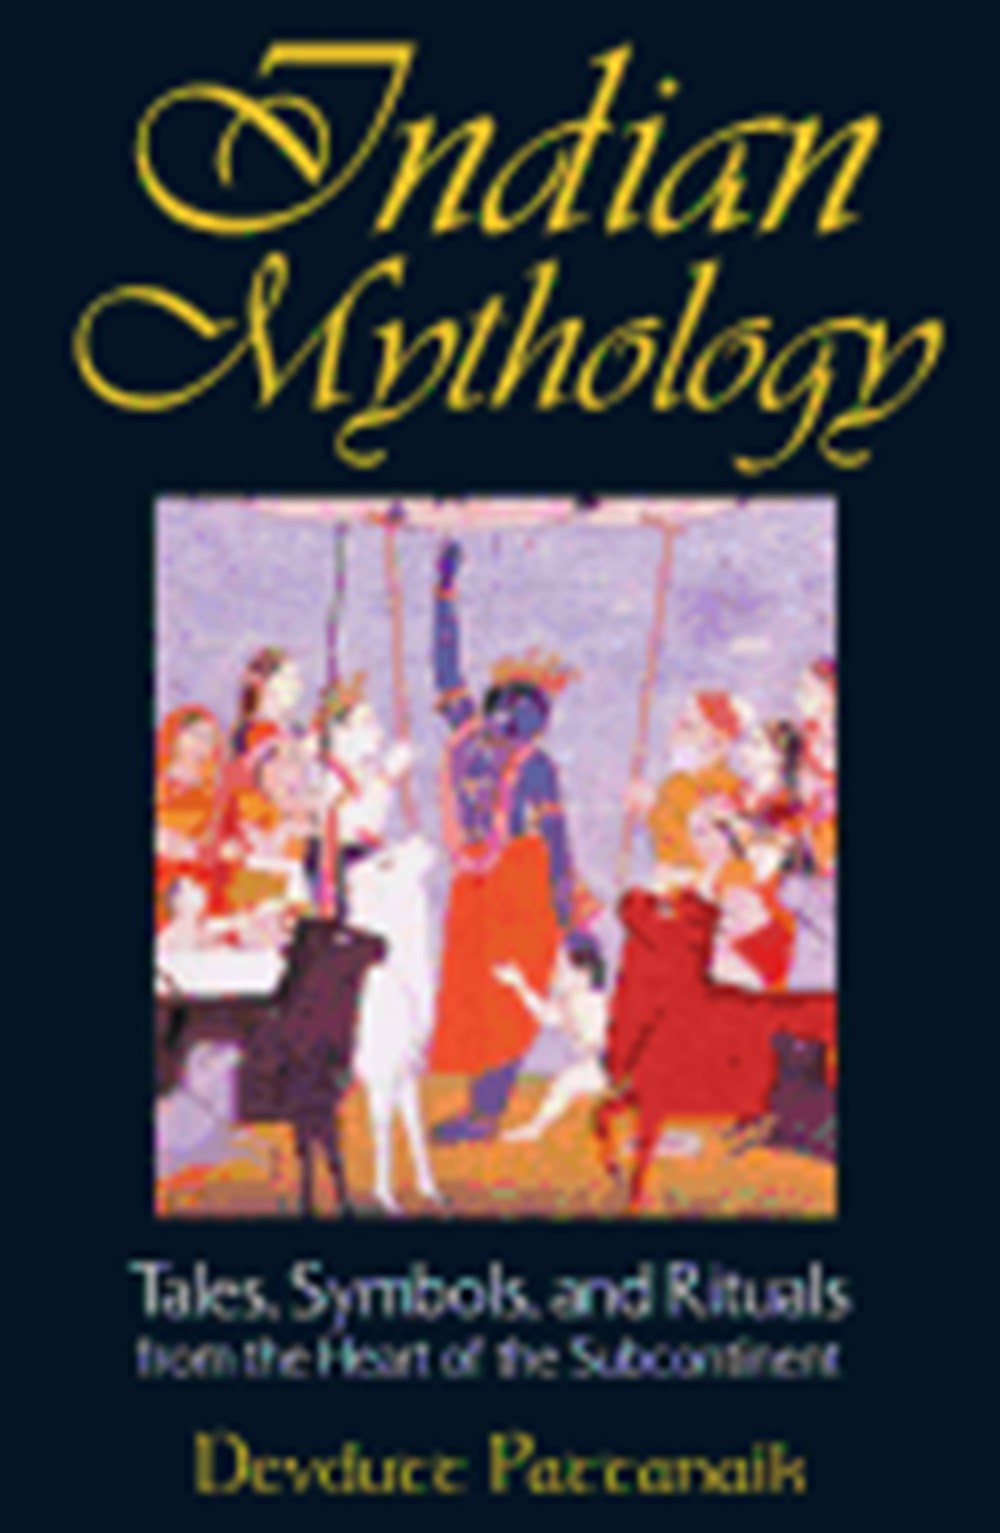 Indian Mythology Tales, Symbols, and Rituals from the Heart of the Subcontinent (Original)